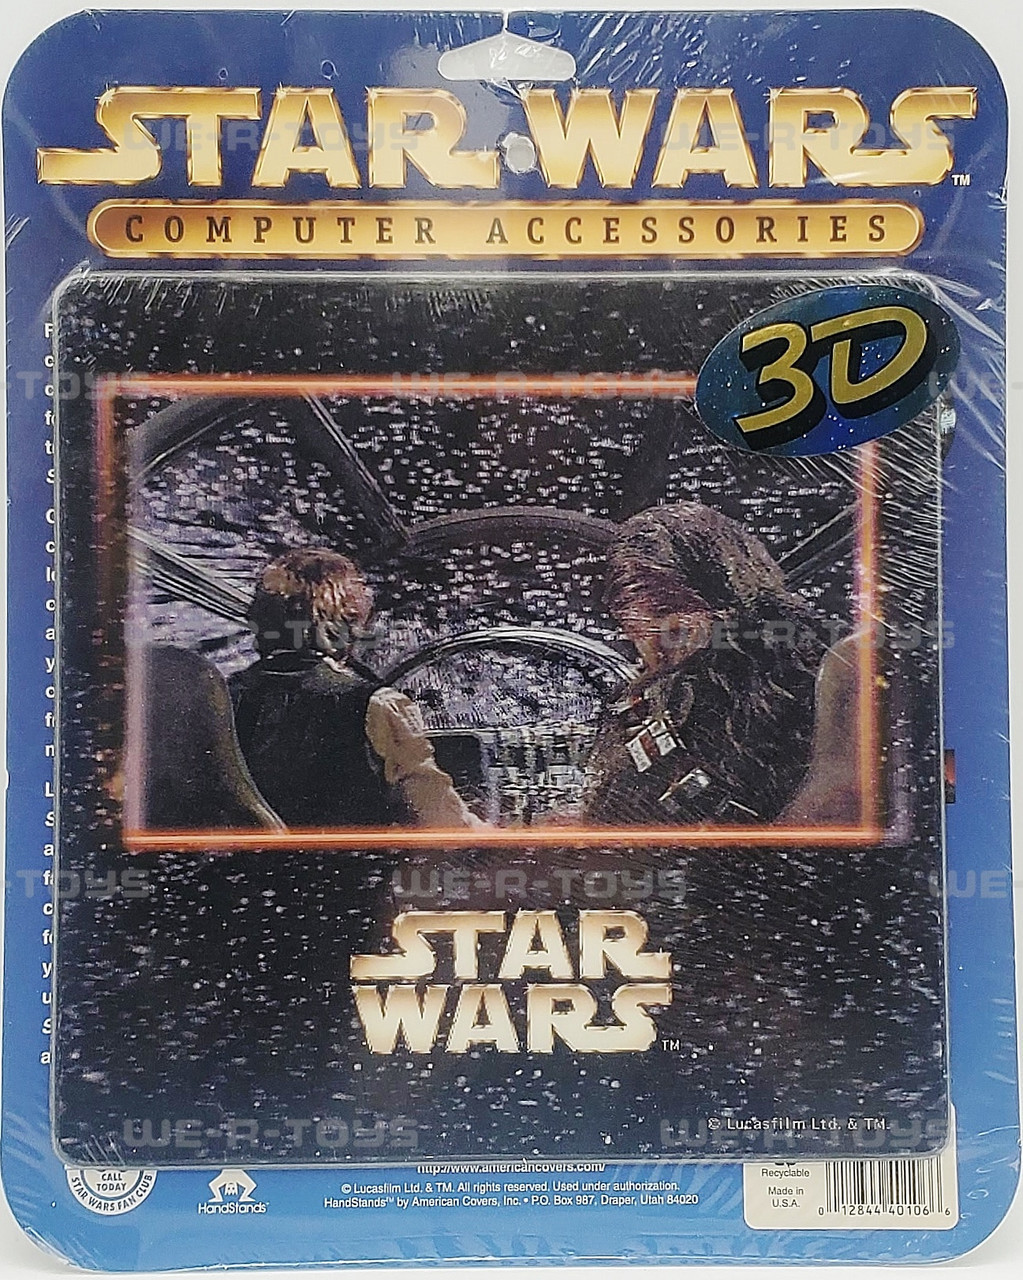 Star Wars Washable Non-Toxic Markers 1997 RoseArt #1650 NRFP - We